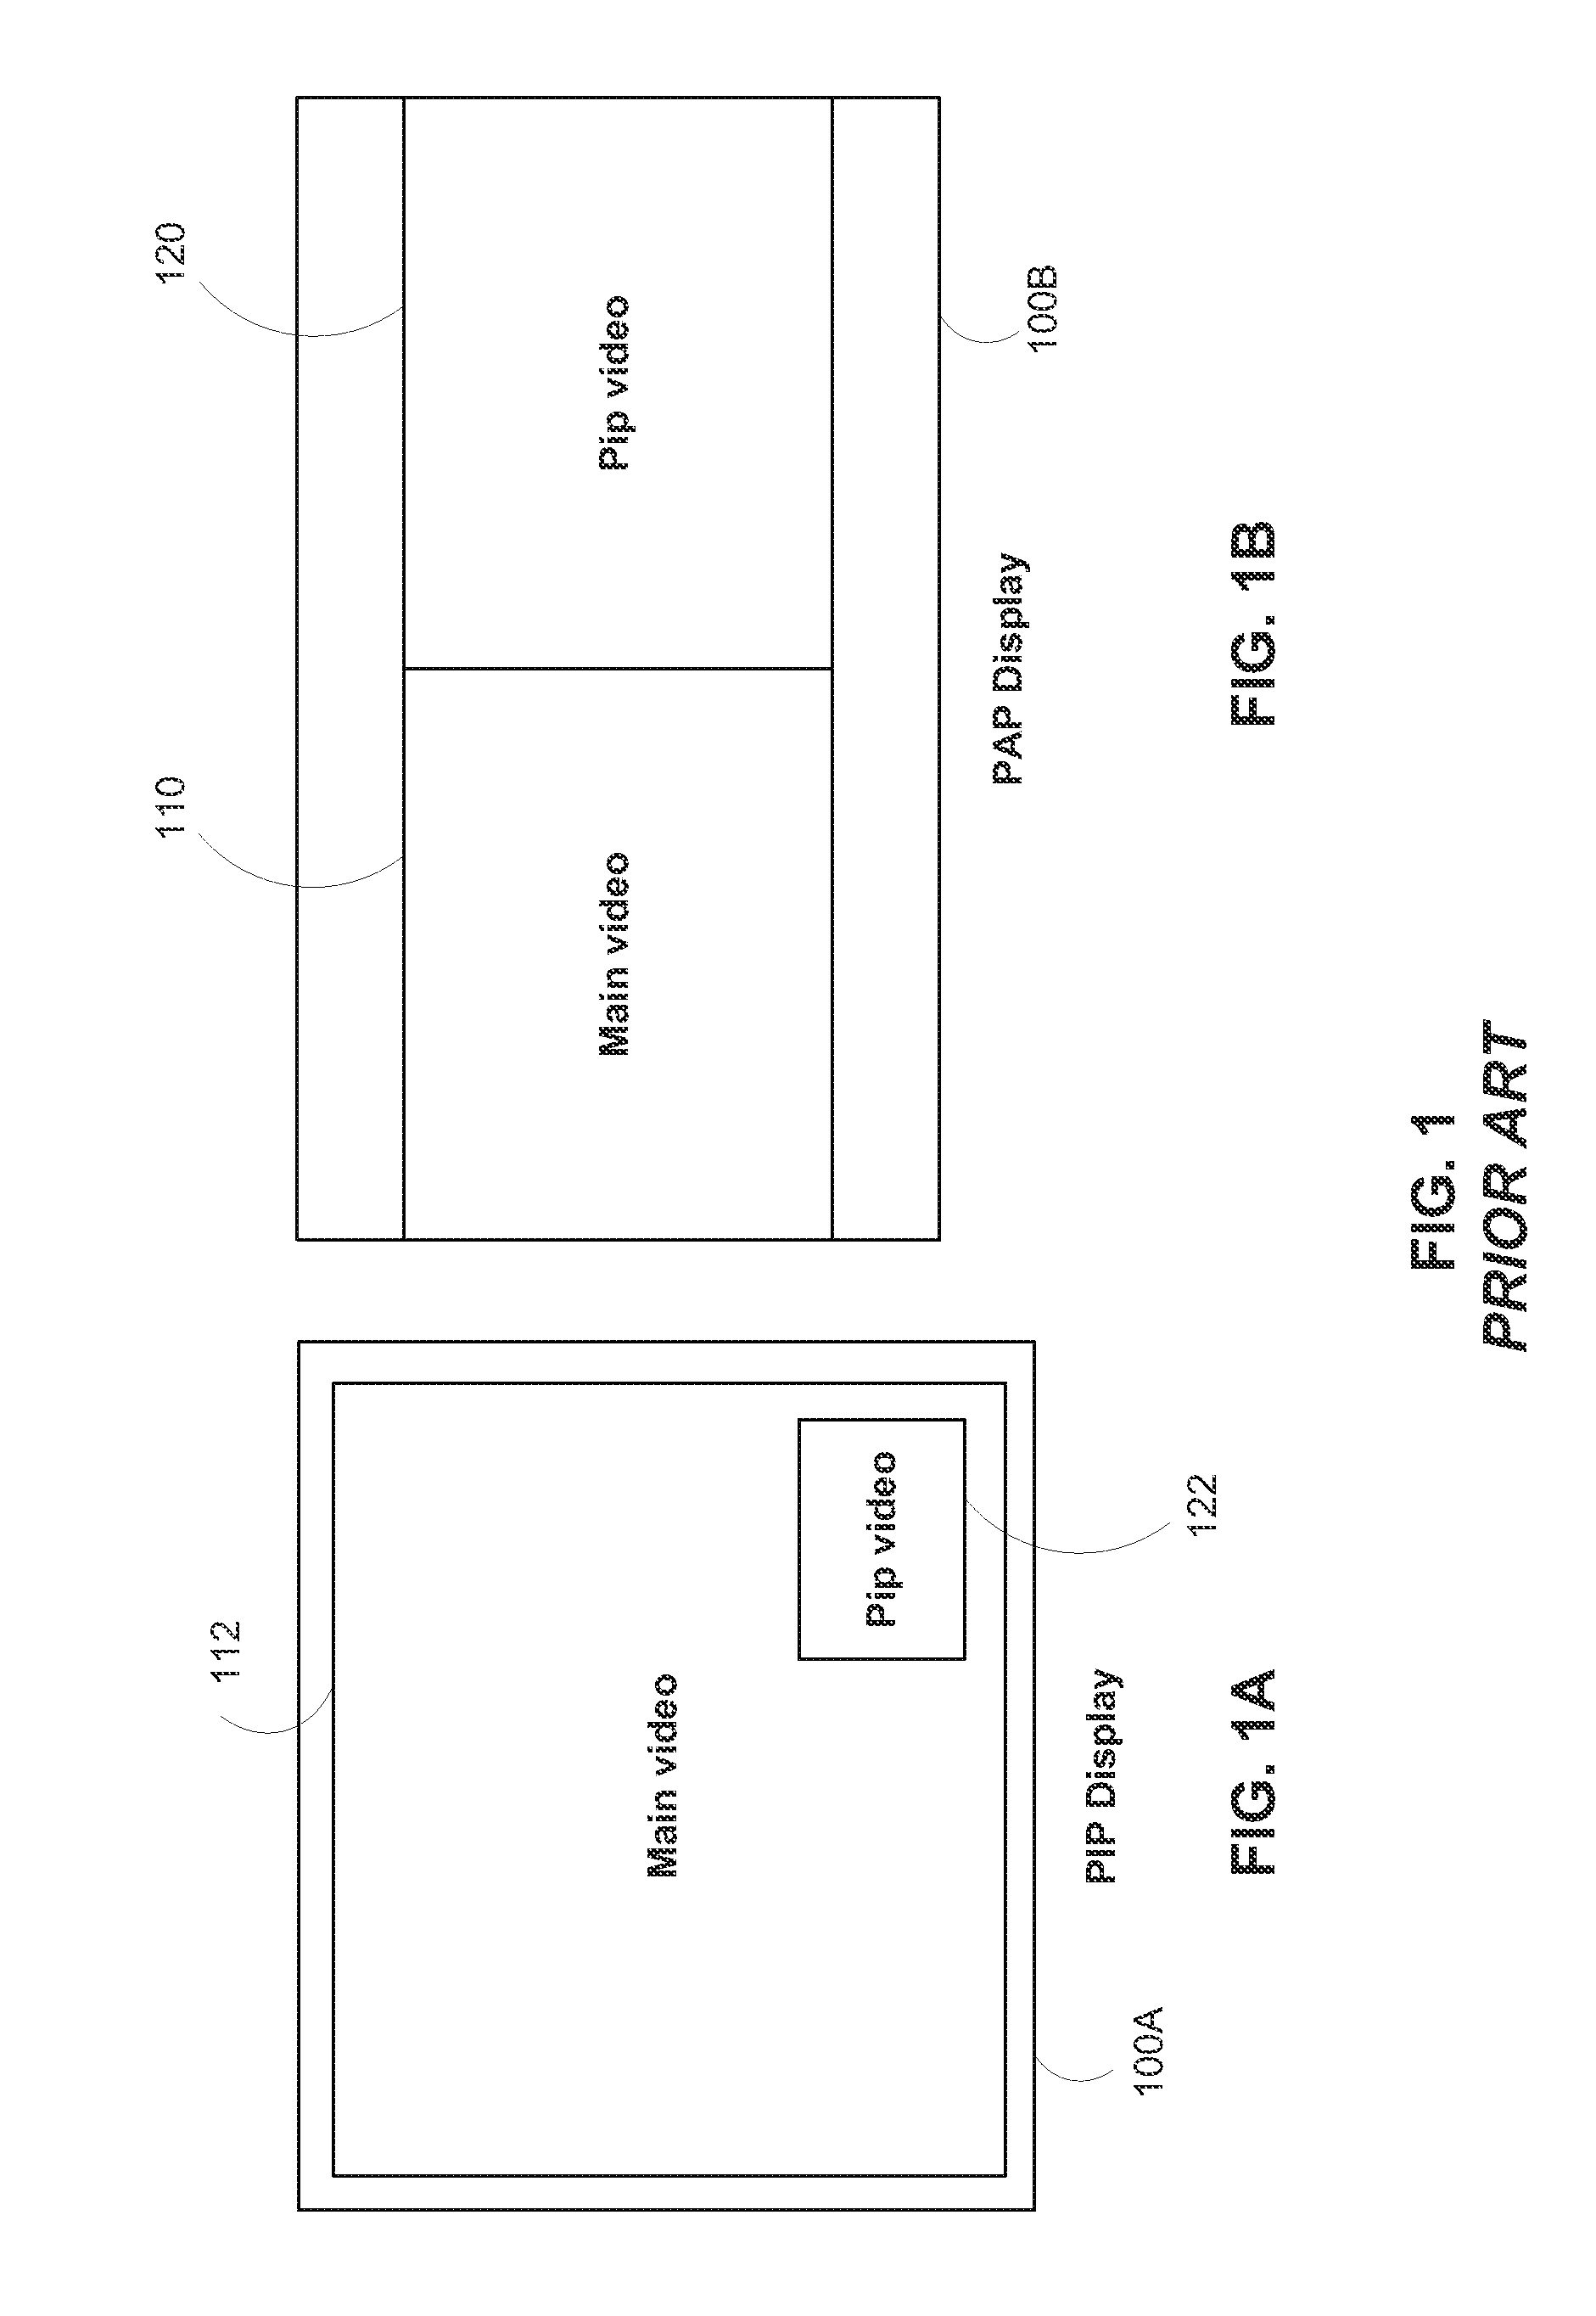 Shared memory multi video channel display apparatus and methods